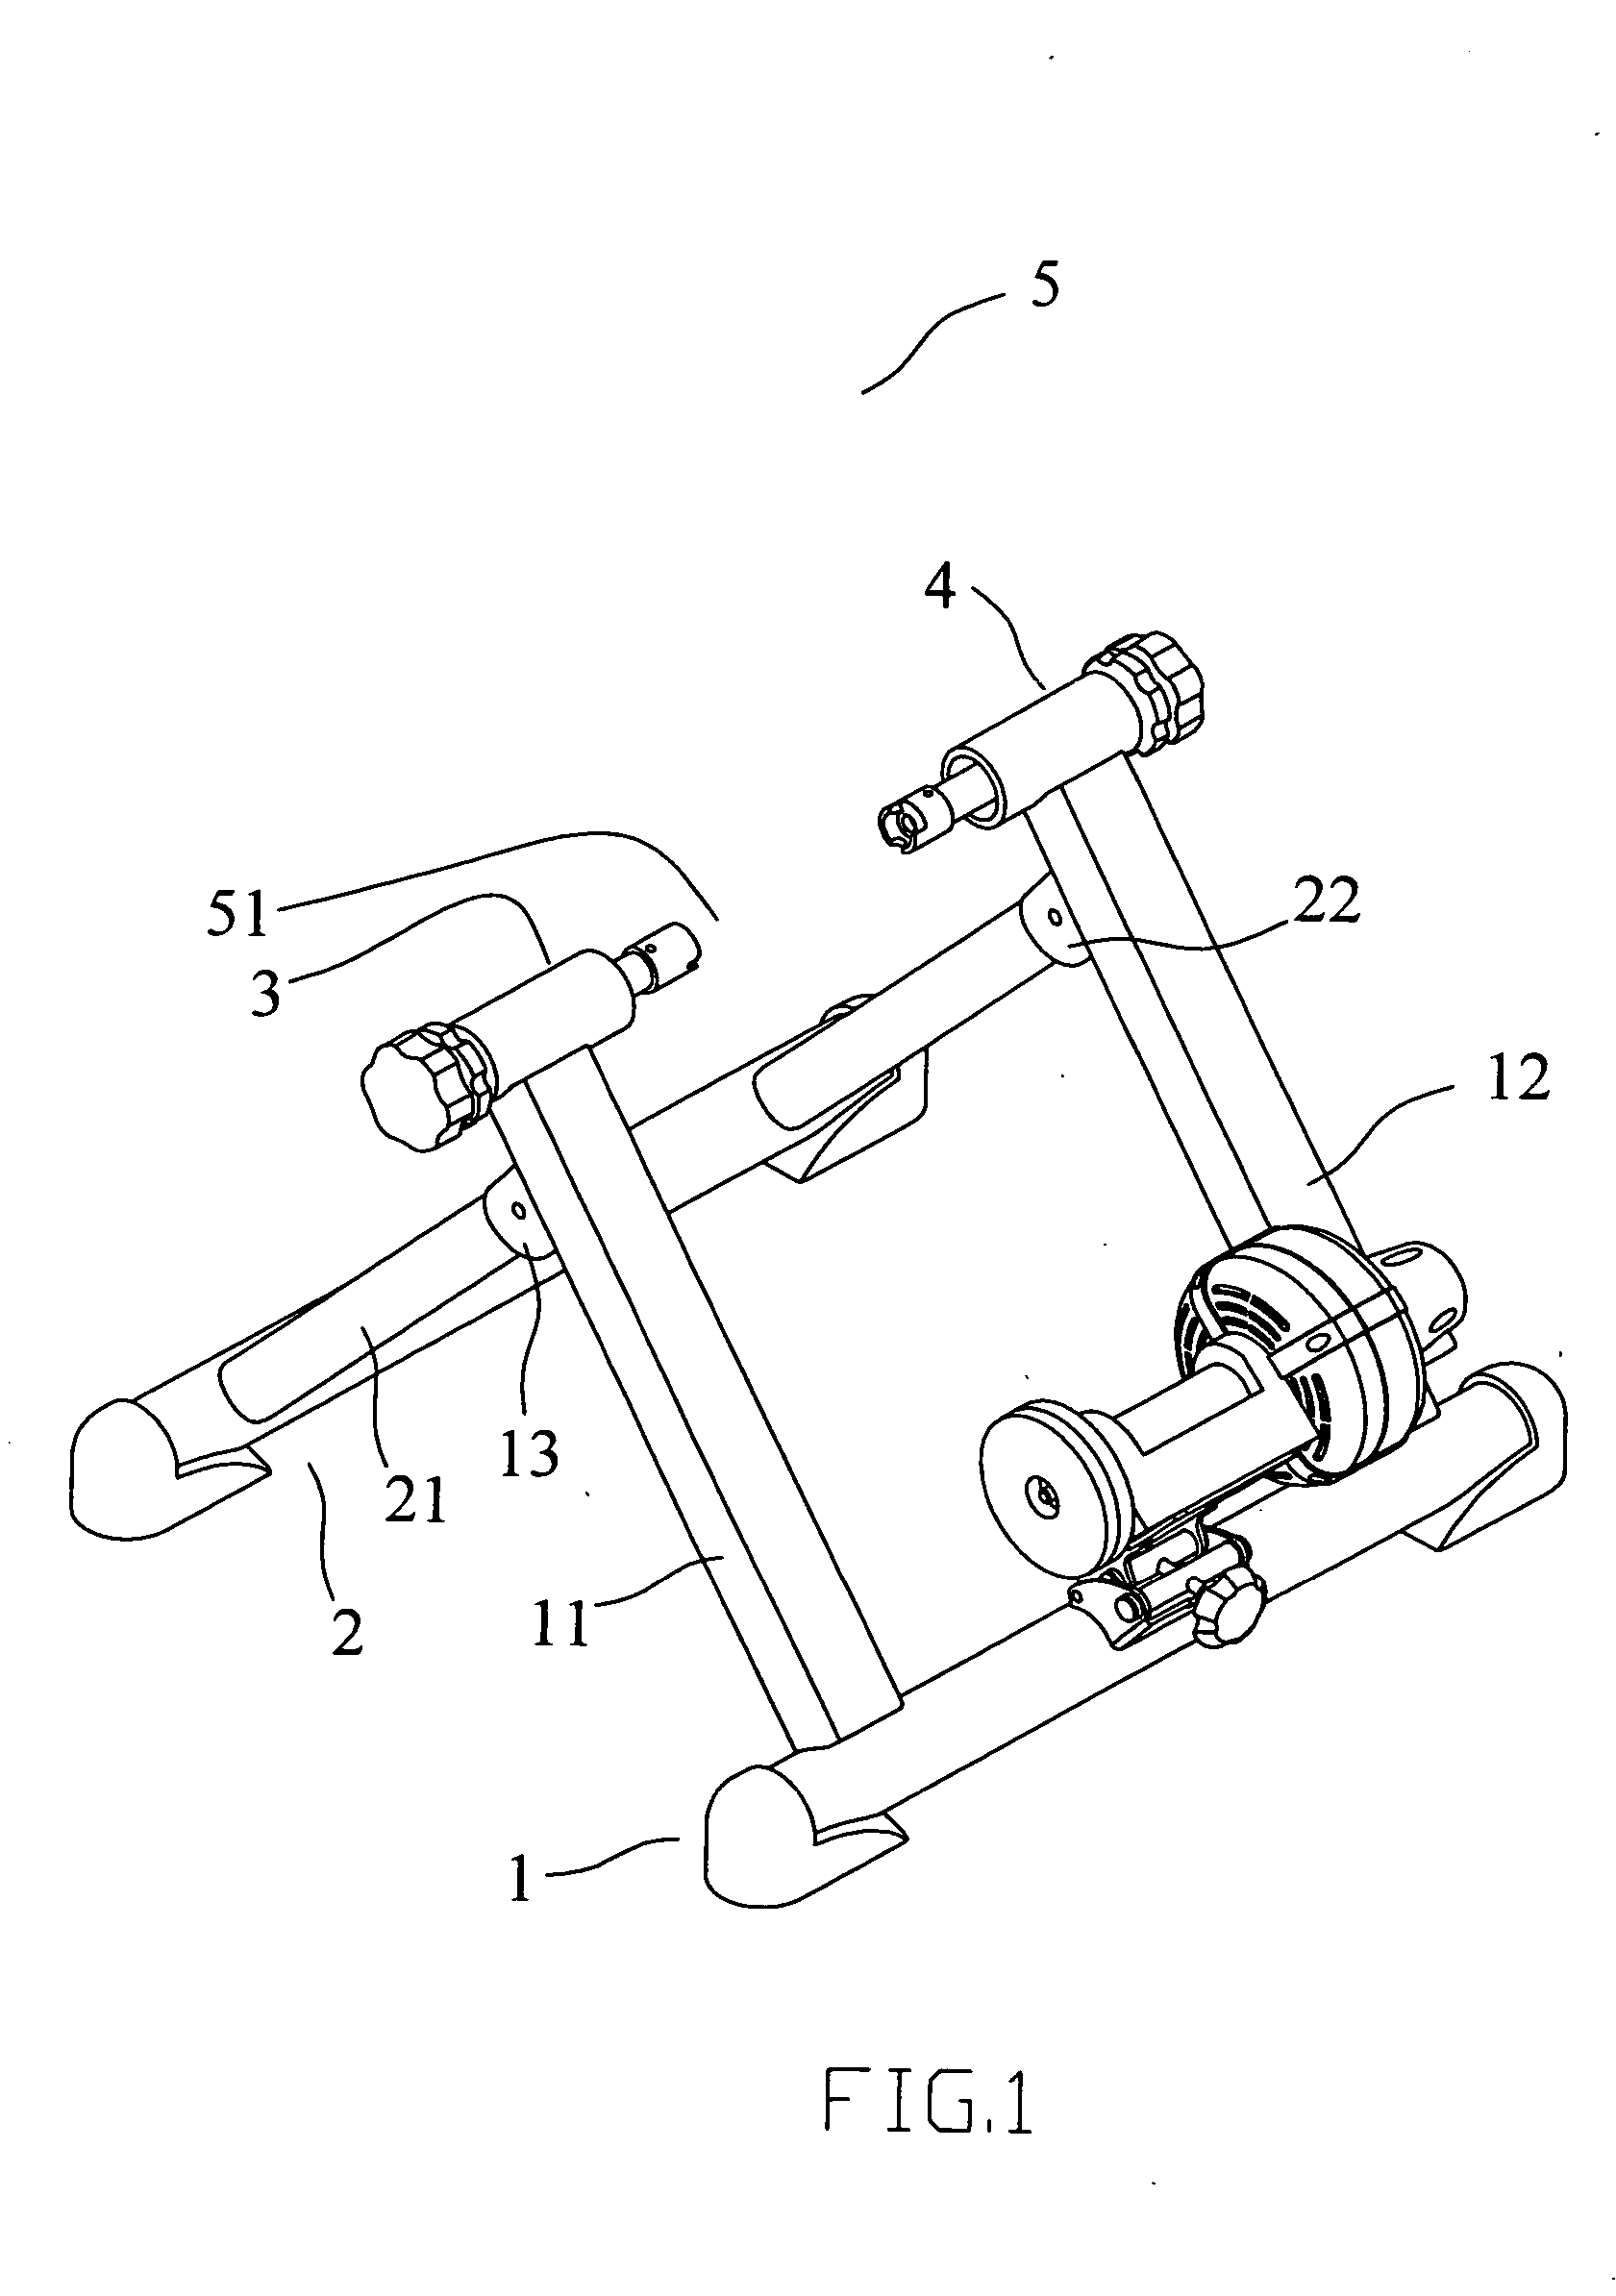 Rear wheel axle support assembly for a fitness bicycle